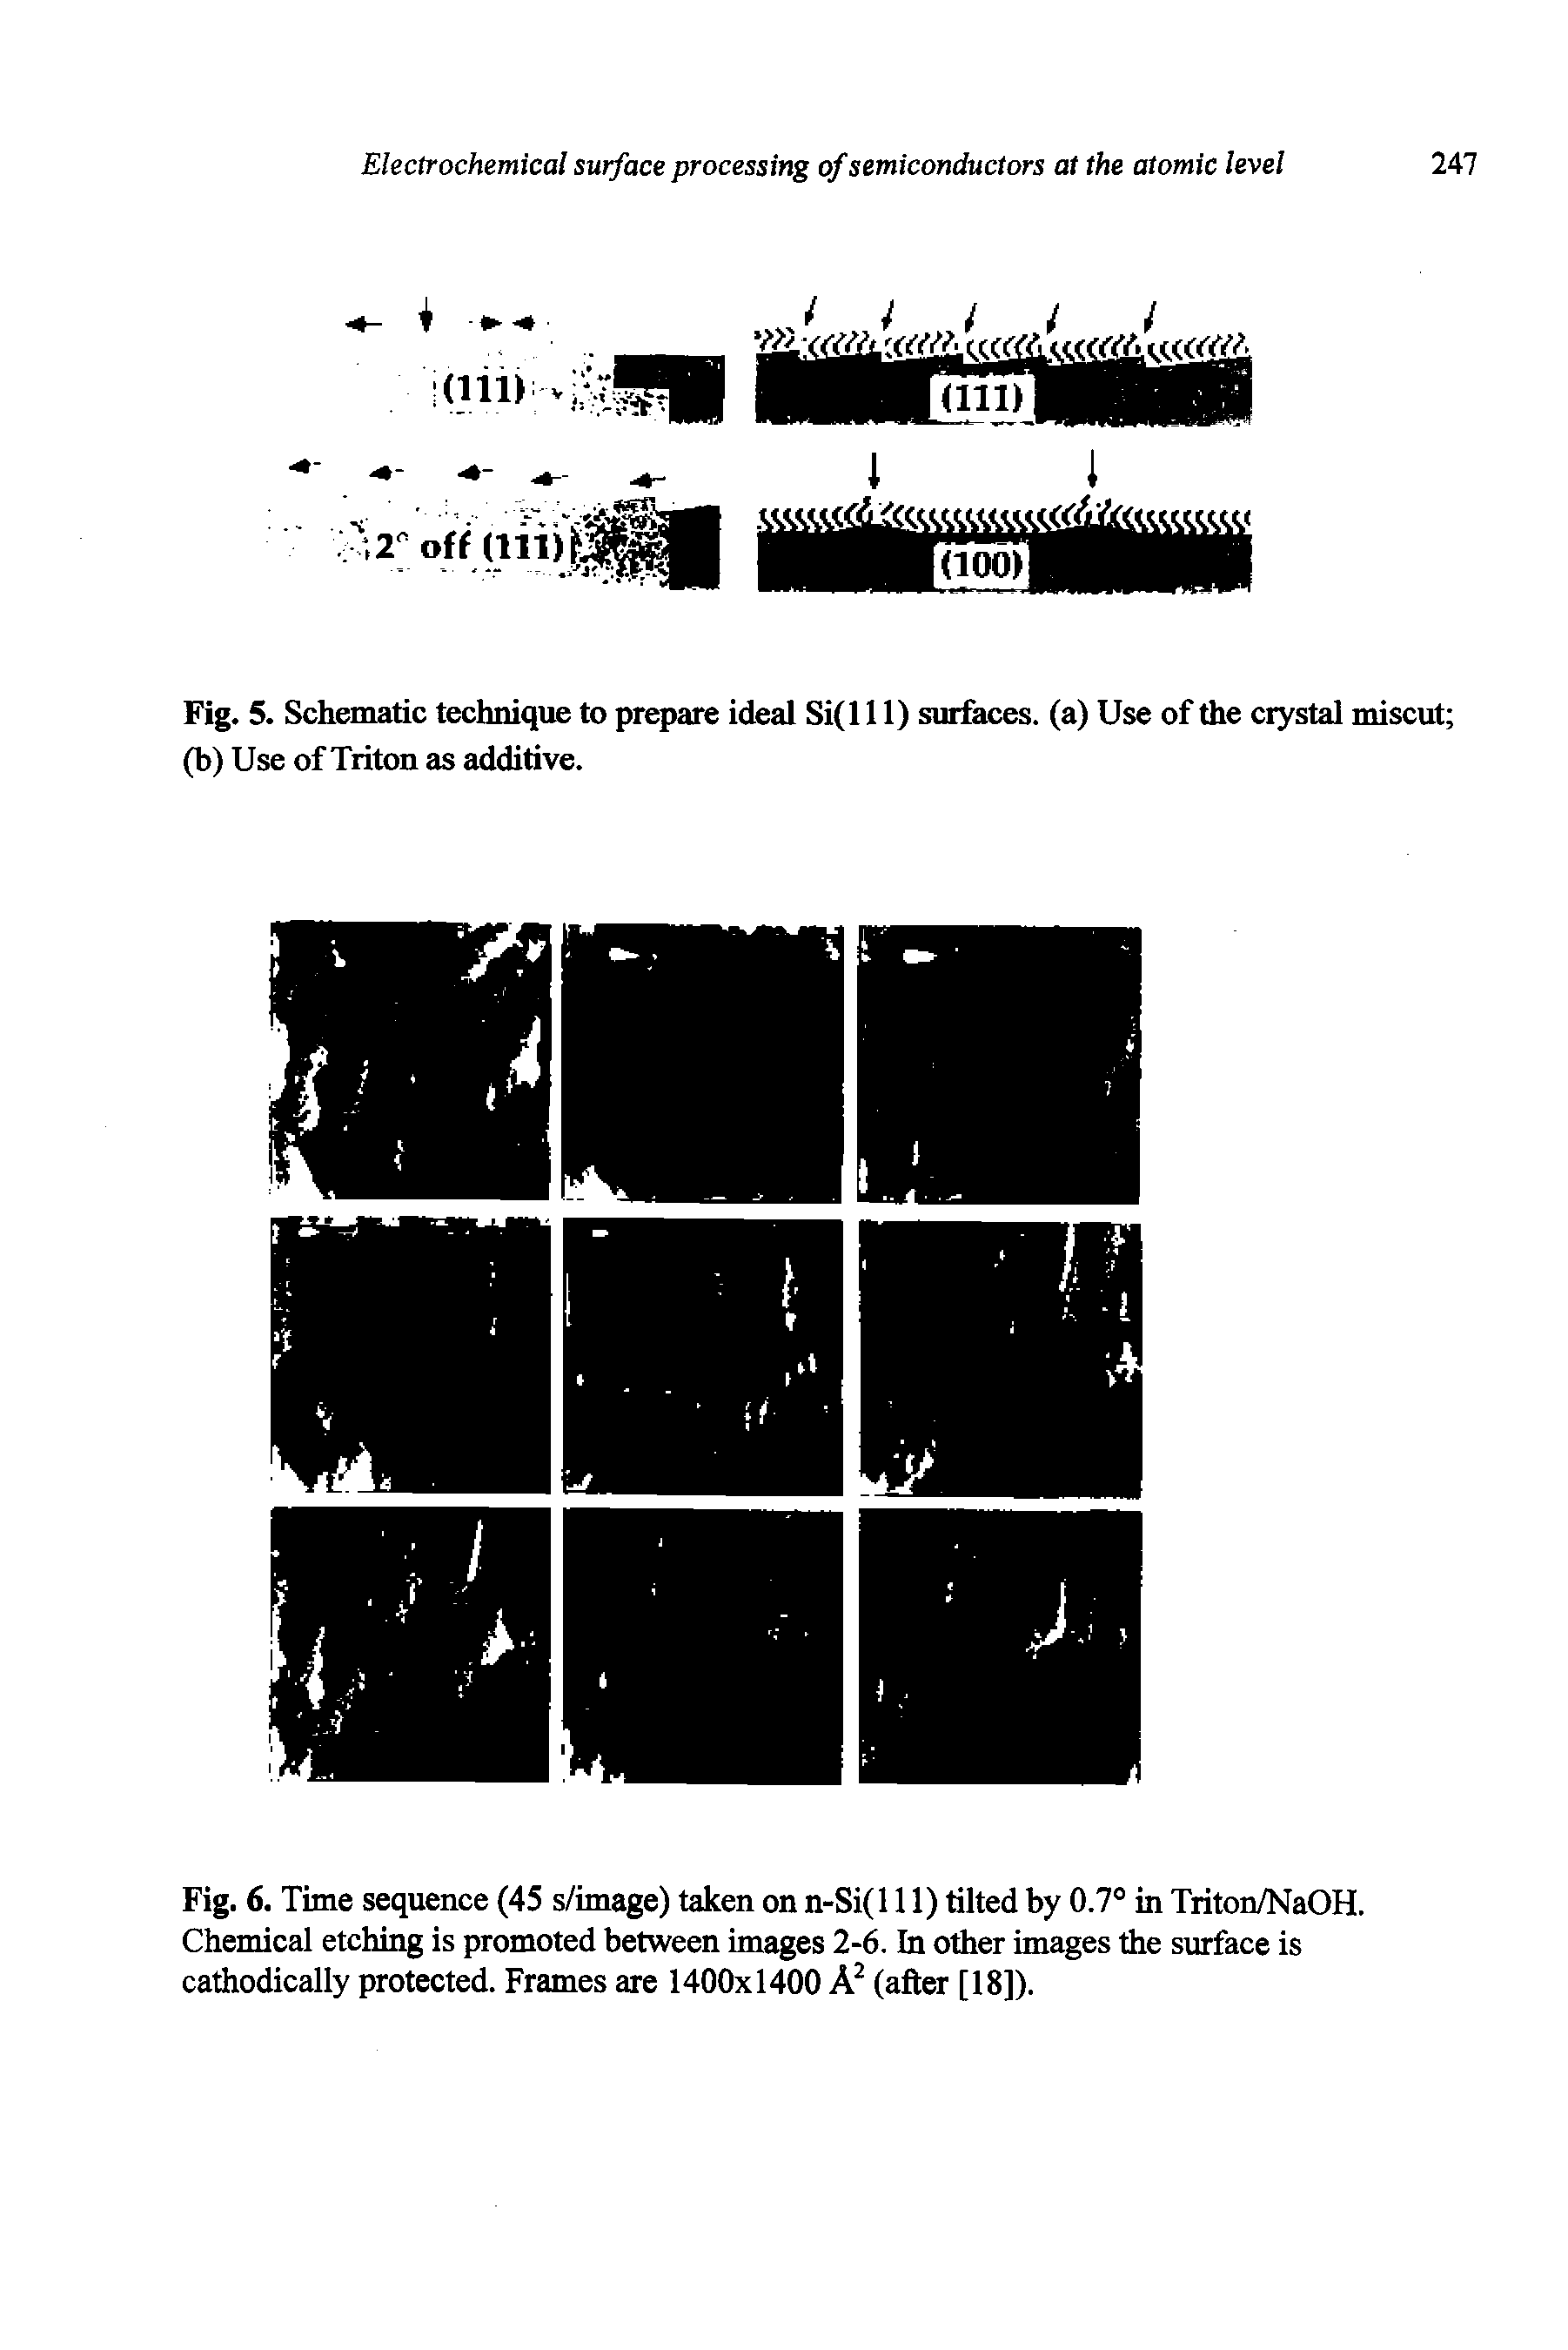 Fig. 5. Schematic technique to prepare ideal Si(l 11) surfaces, (a) Use of the crystal miscut (b) Use of Triton as additive.